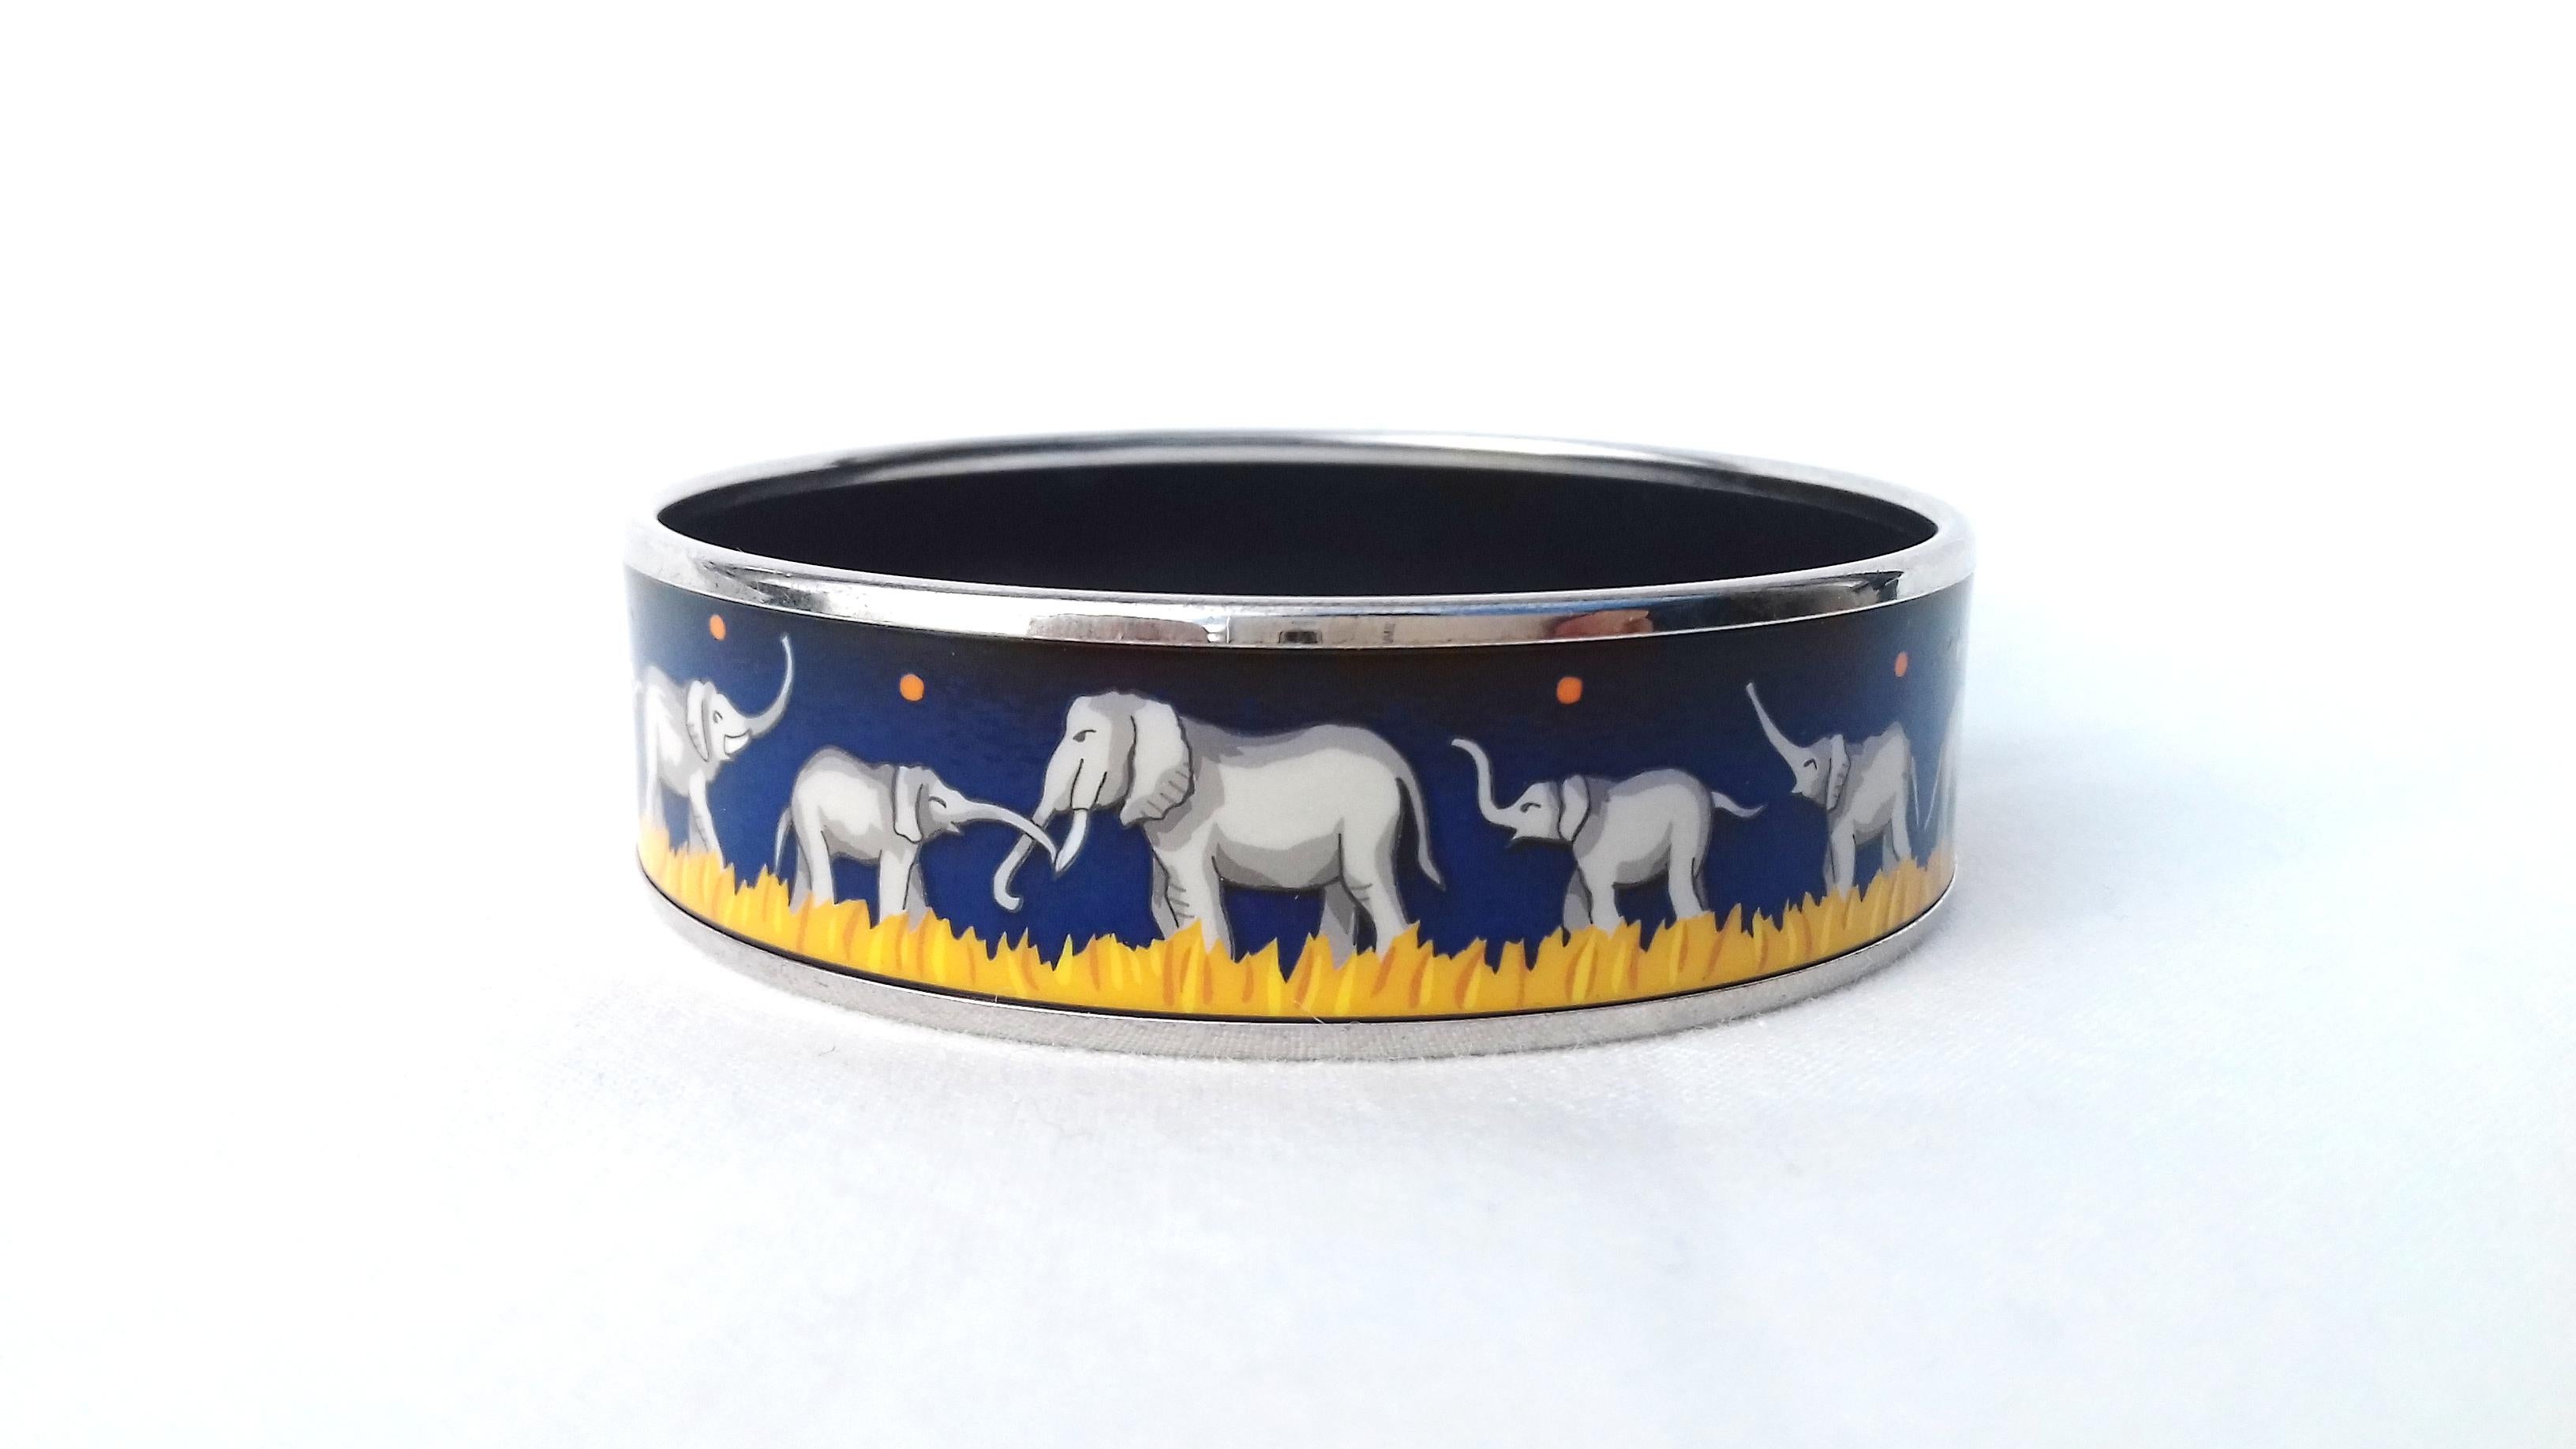 Beautiful Authentic Hermès Bracelet

Pattern: Elephants Grazing

Rare colorway ! Hard to find

Made in Austria + K 
 
Made of Printed Enamel and Palladium Plated Hardware (Silver-tone)

Colors: Blue background with orange polka dots, Grey Elephants,